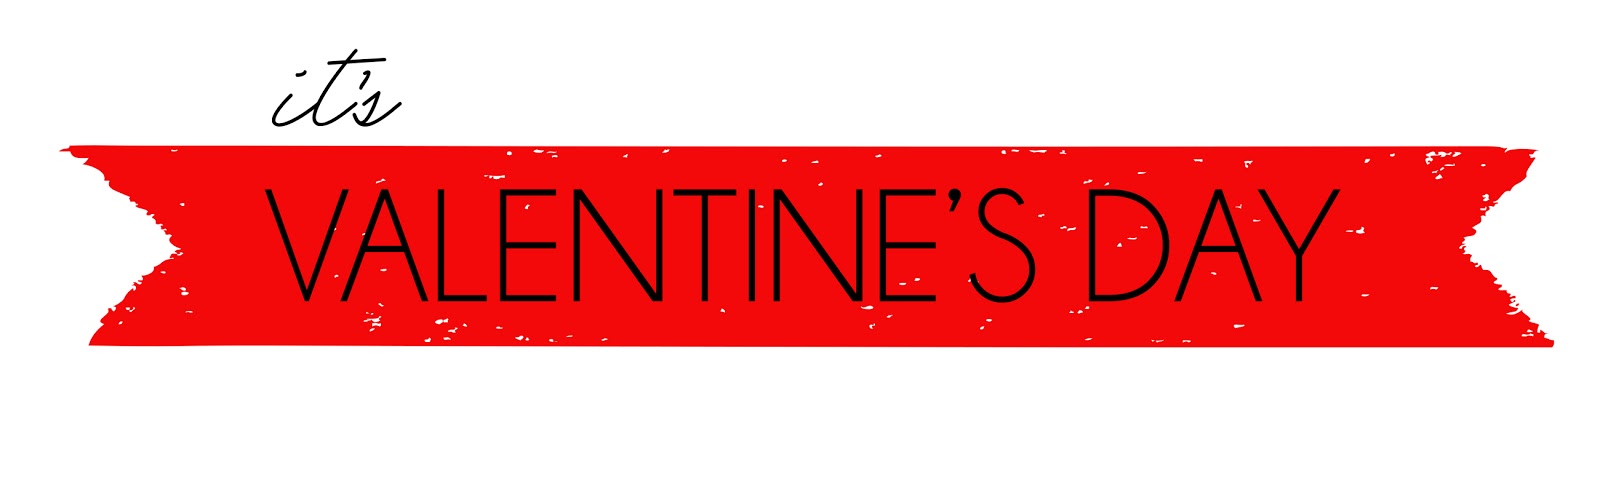 valentine's day banners clipart - photo #14